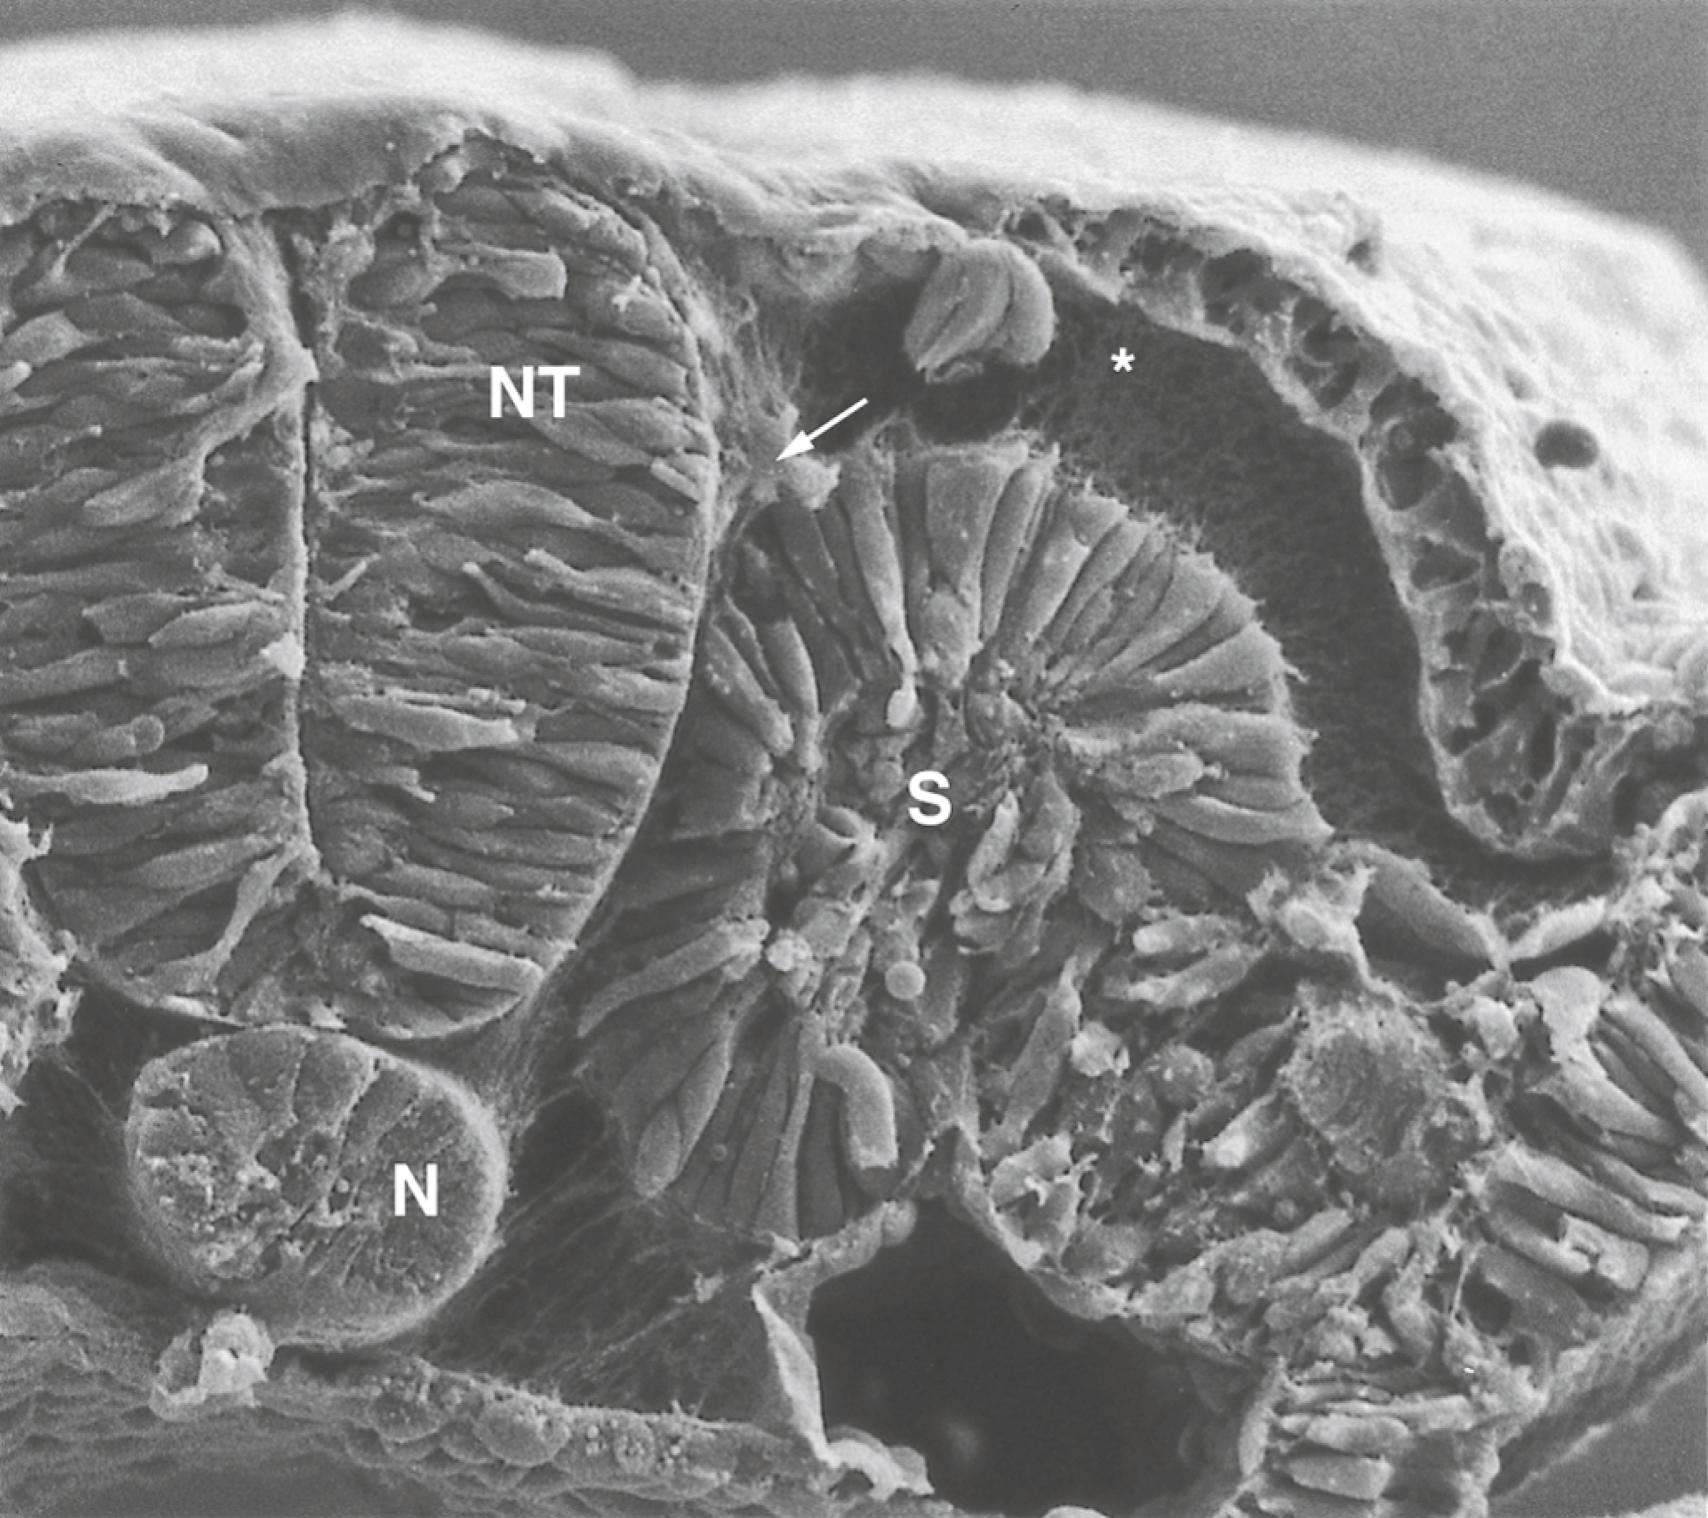 Fig. 12.2, Scanning electron micrograph of a chick embryo, showing the early migration of neural crest cells ( arrow ) out of the neural tube (NT).